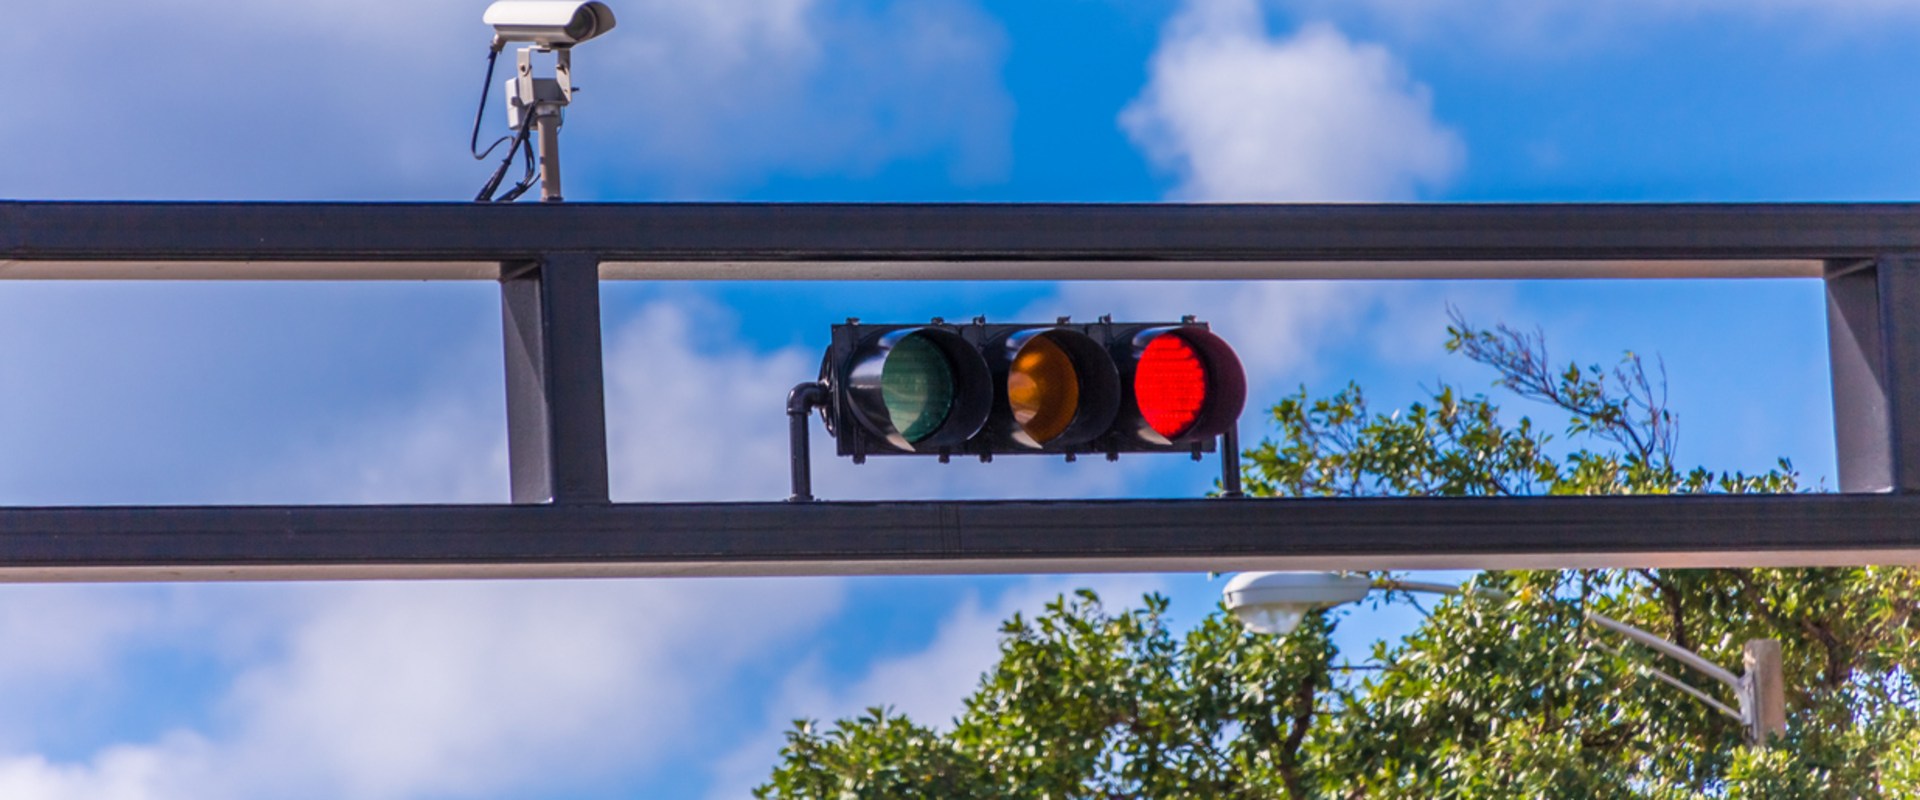 Running a Red Light in California: Understand the Risks and Penalties